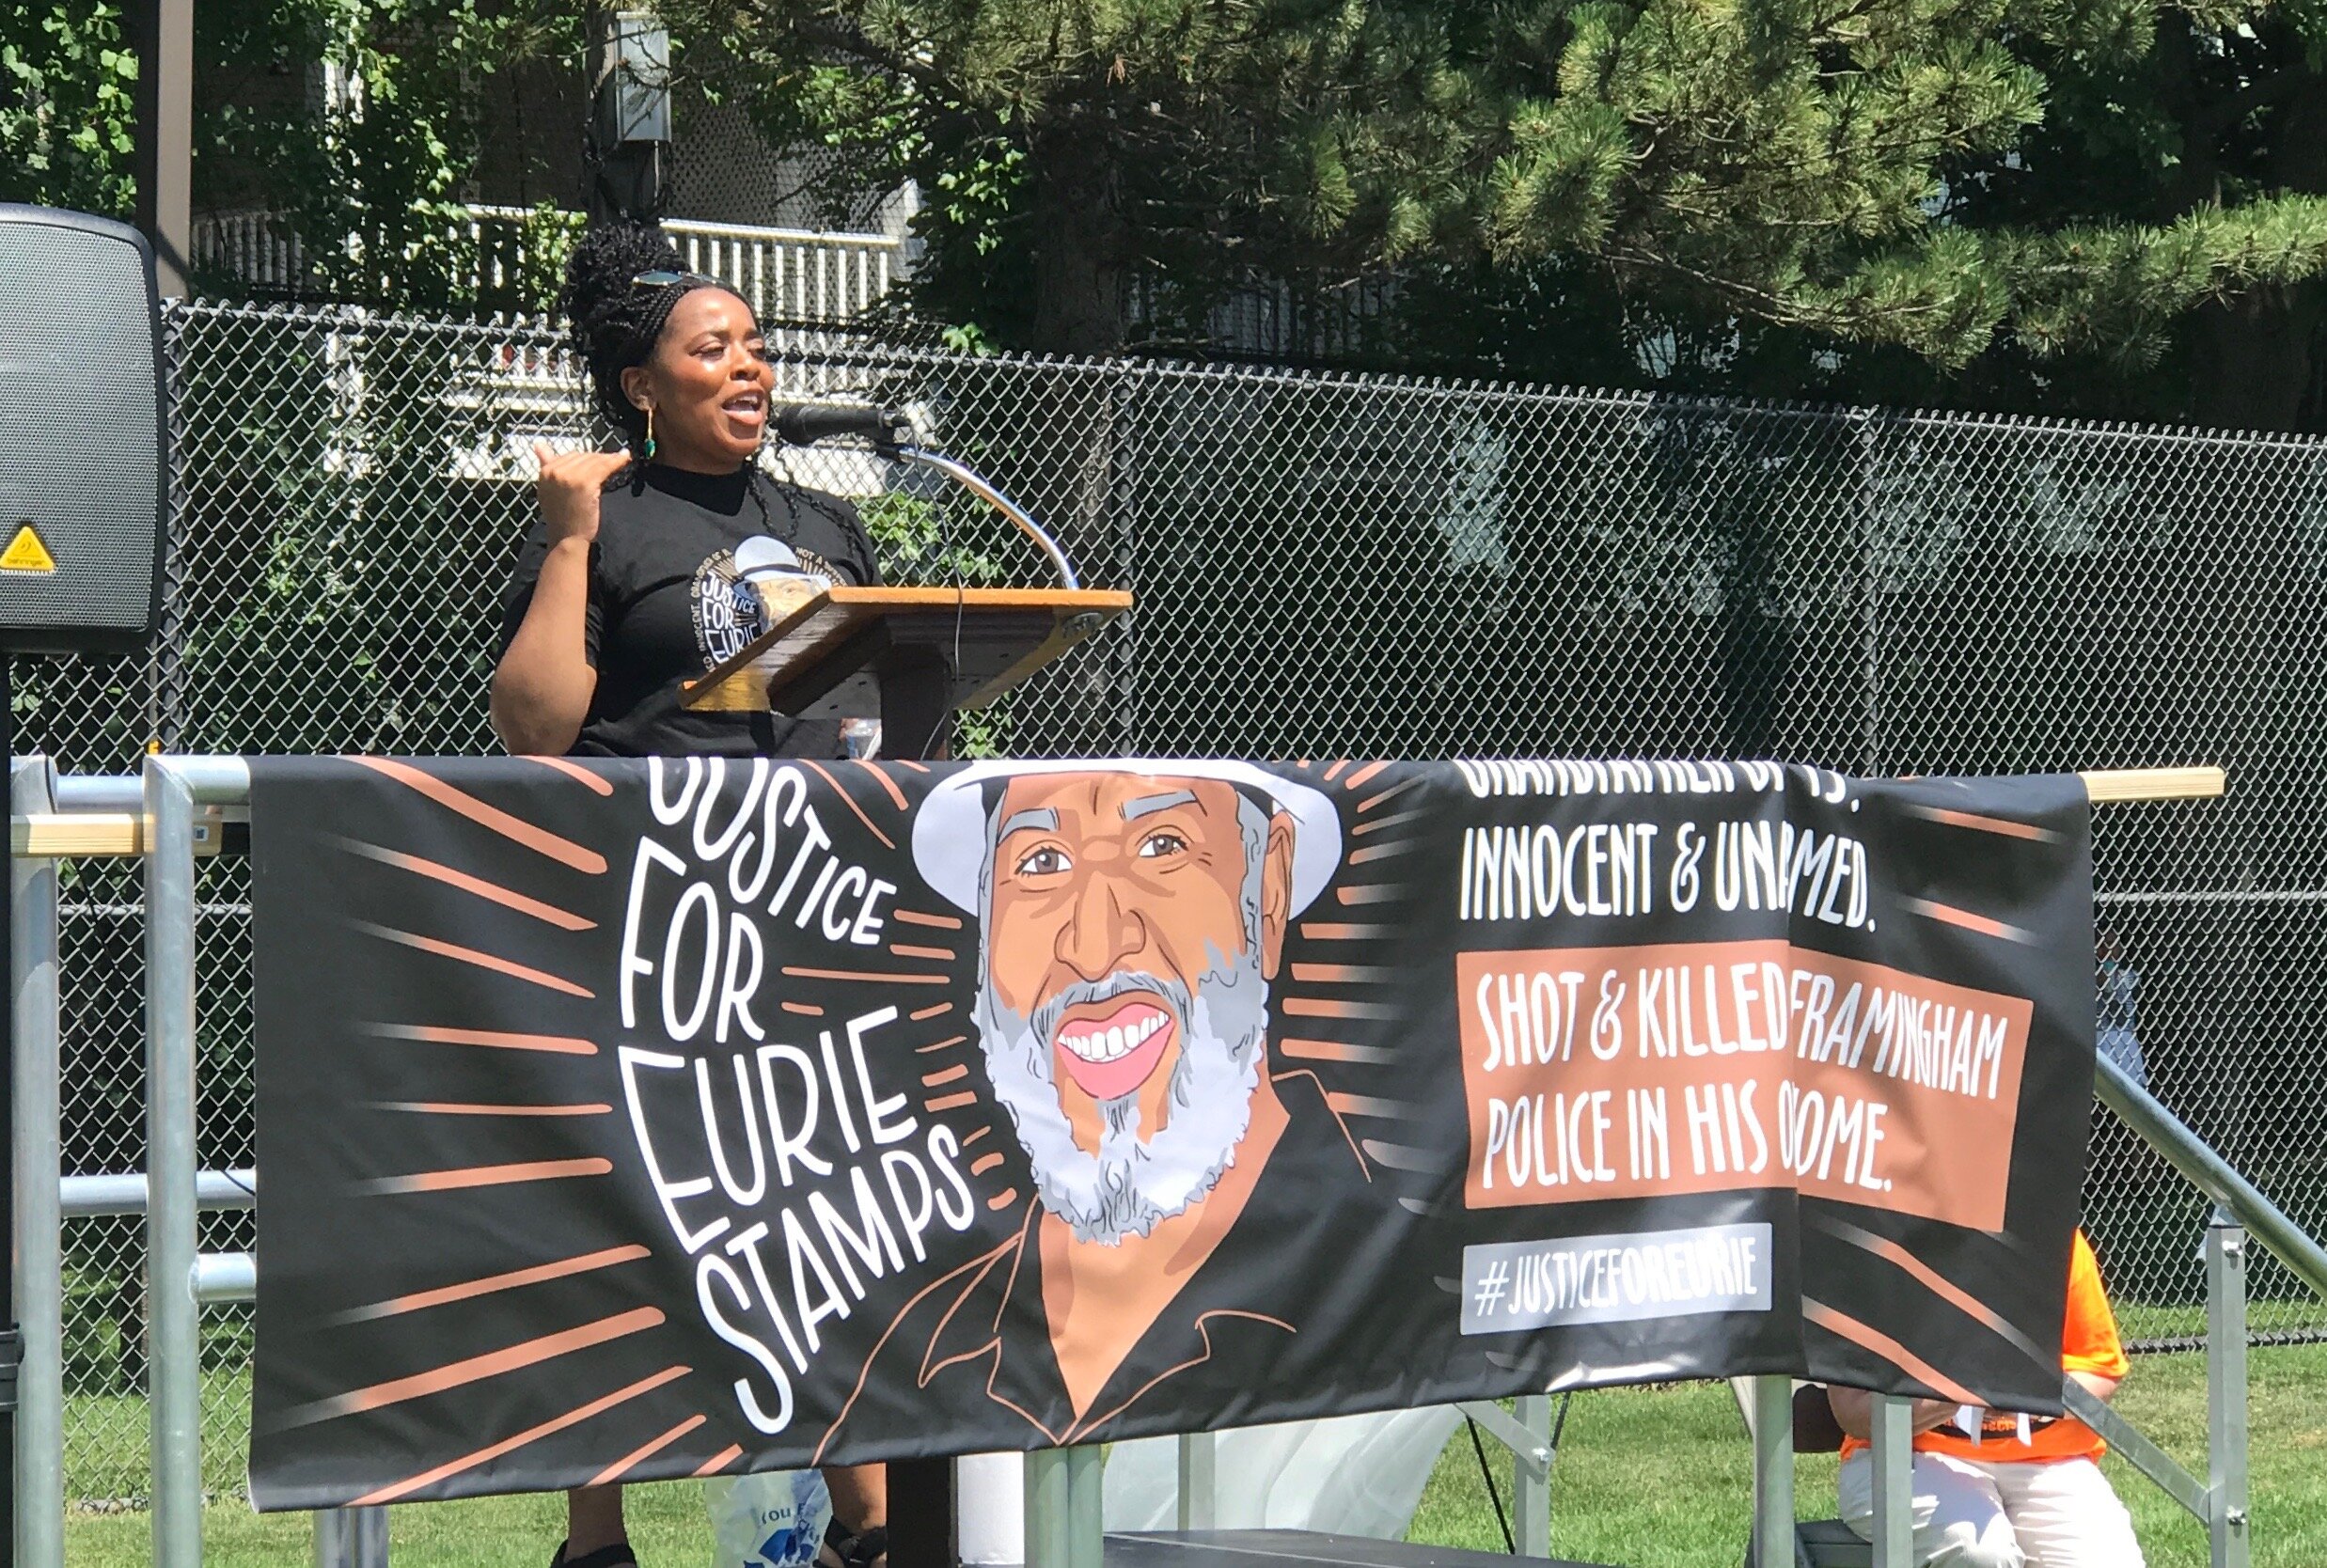  Moriah Wilkins, granddaughter of Eurie Stamps, addresses supporters at Hoyt Field in Cambridge. 